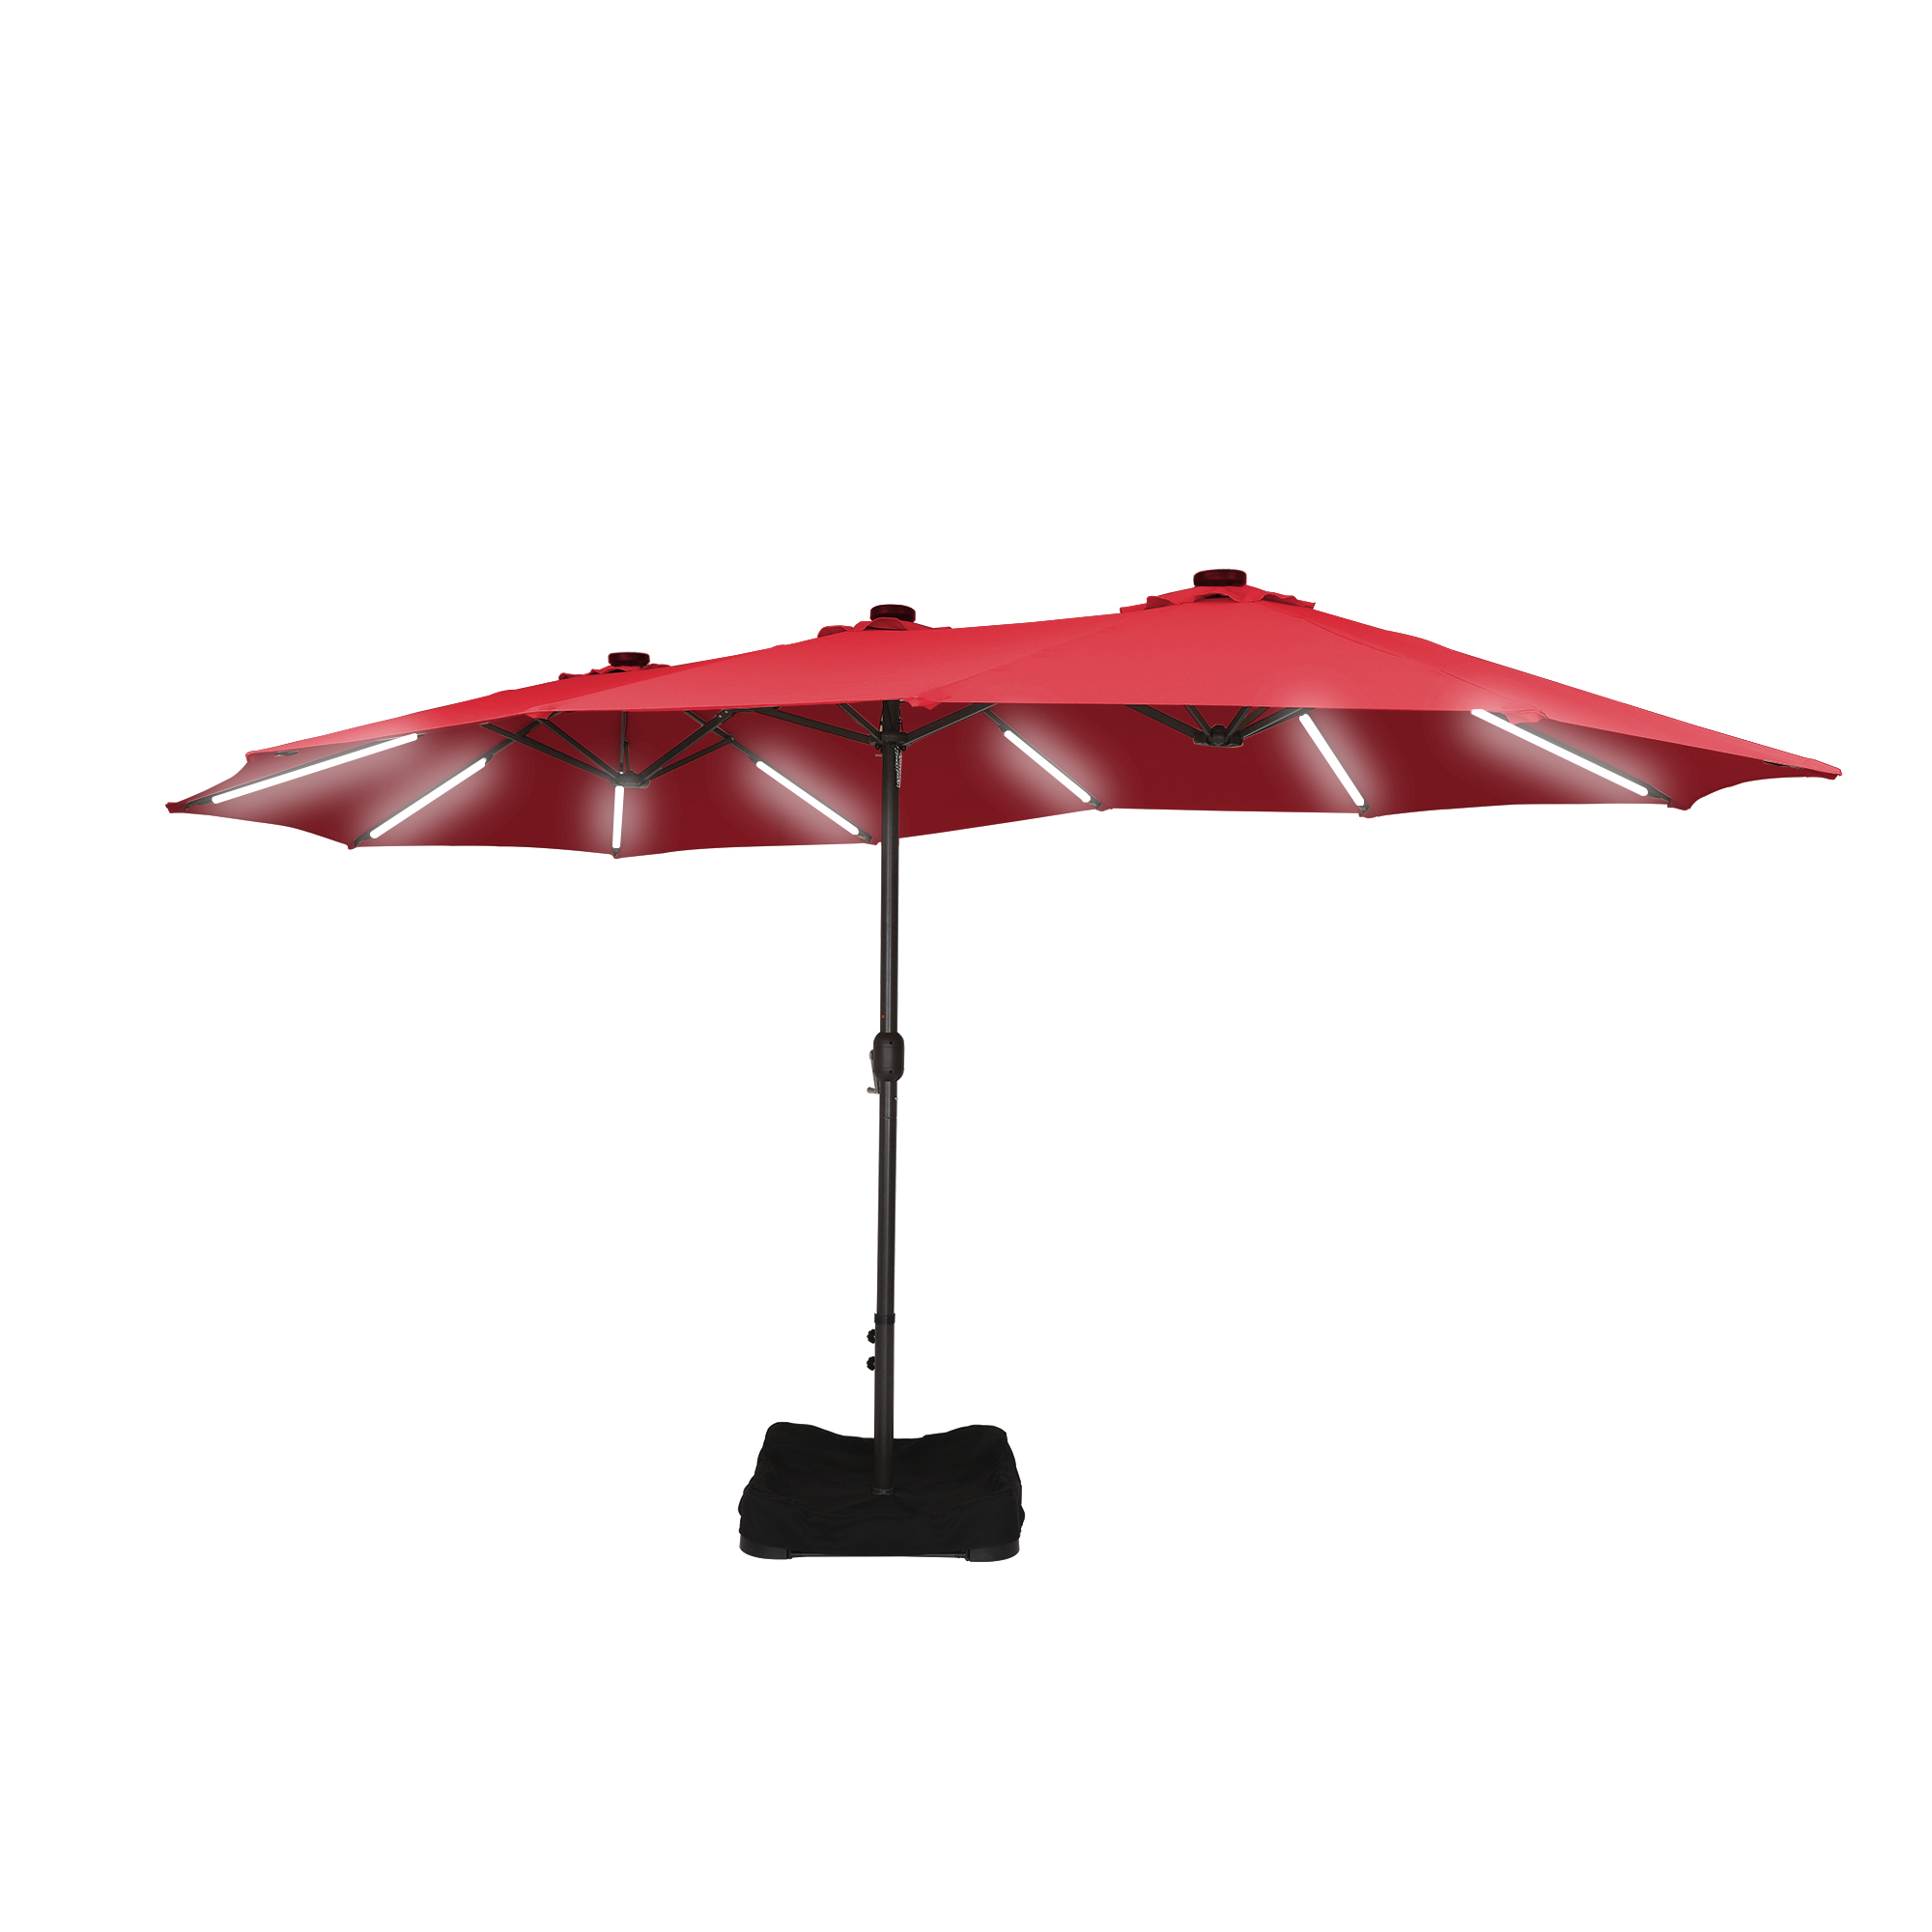 15 FT Patio Market Umbrella with Base and Solar LED Strip Lights